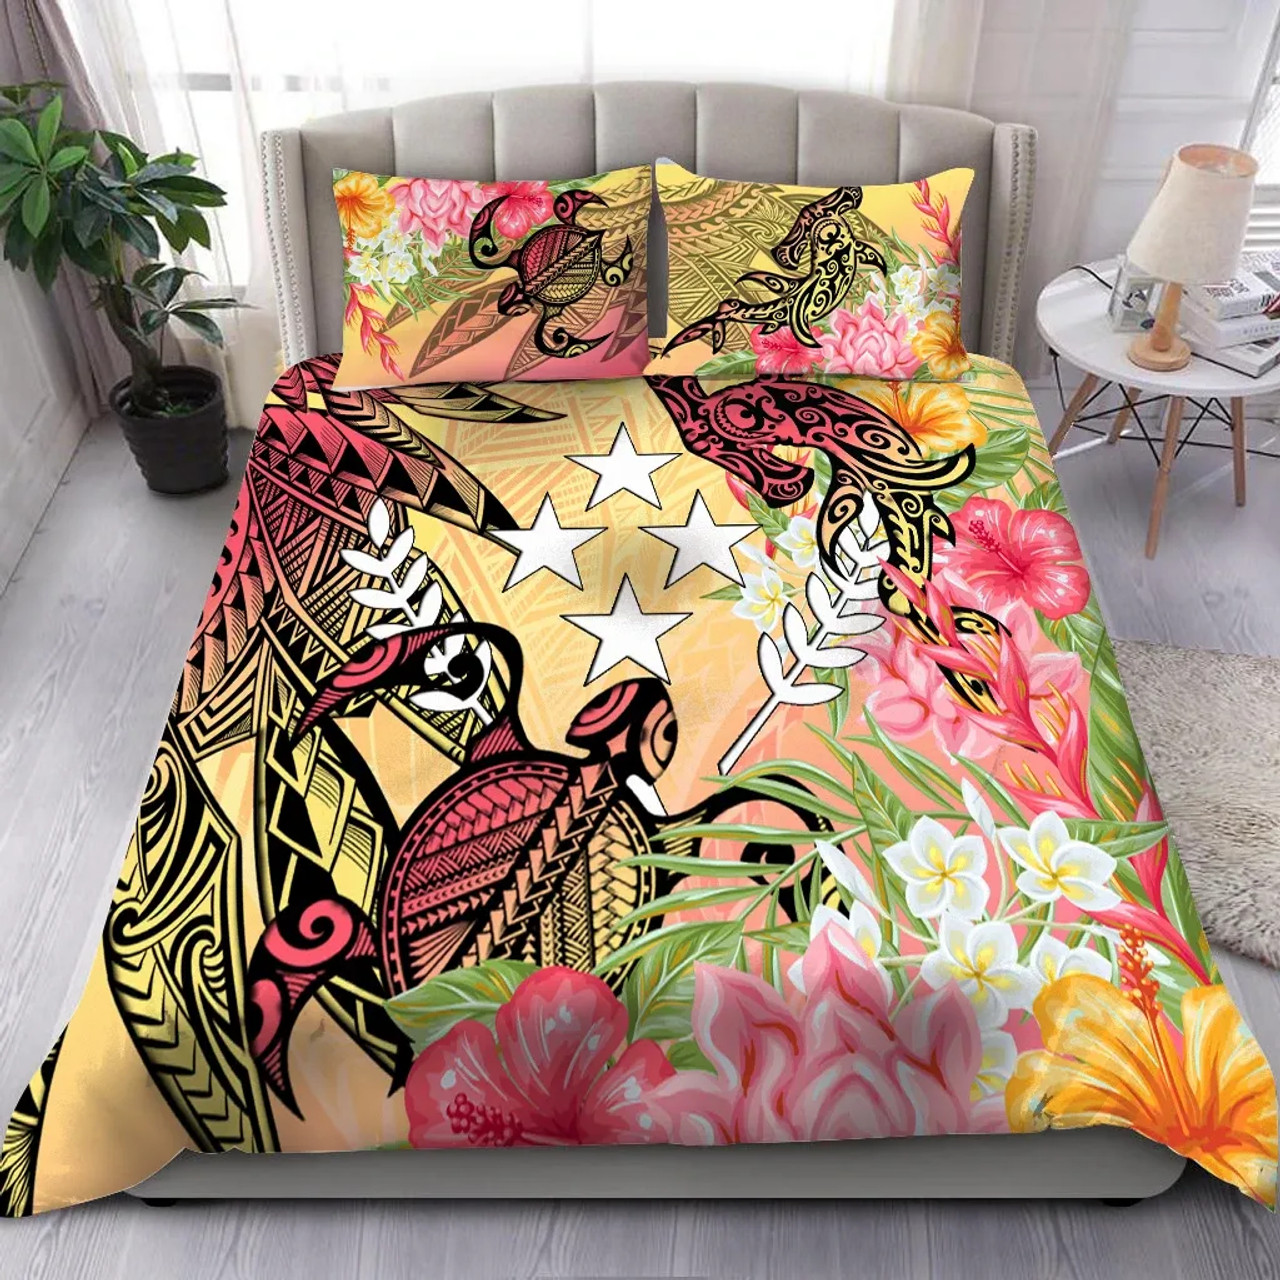 Kosrae State Bedding Set - Flowers Tropical With Sea Animals 1